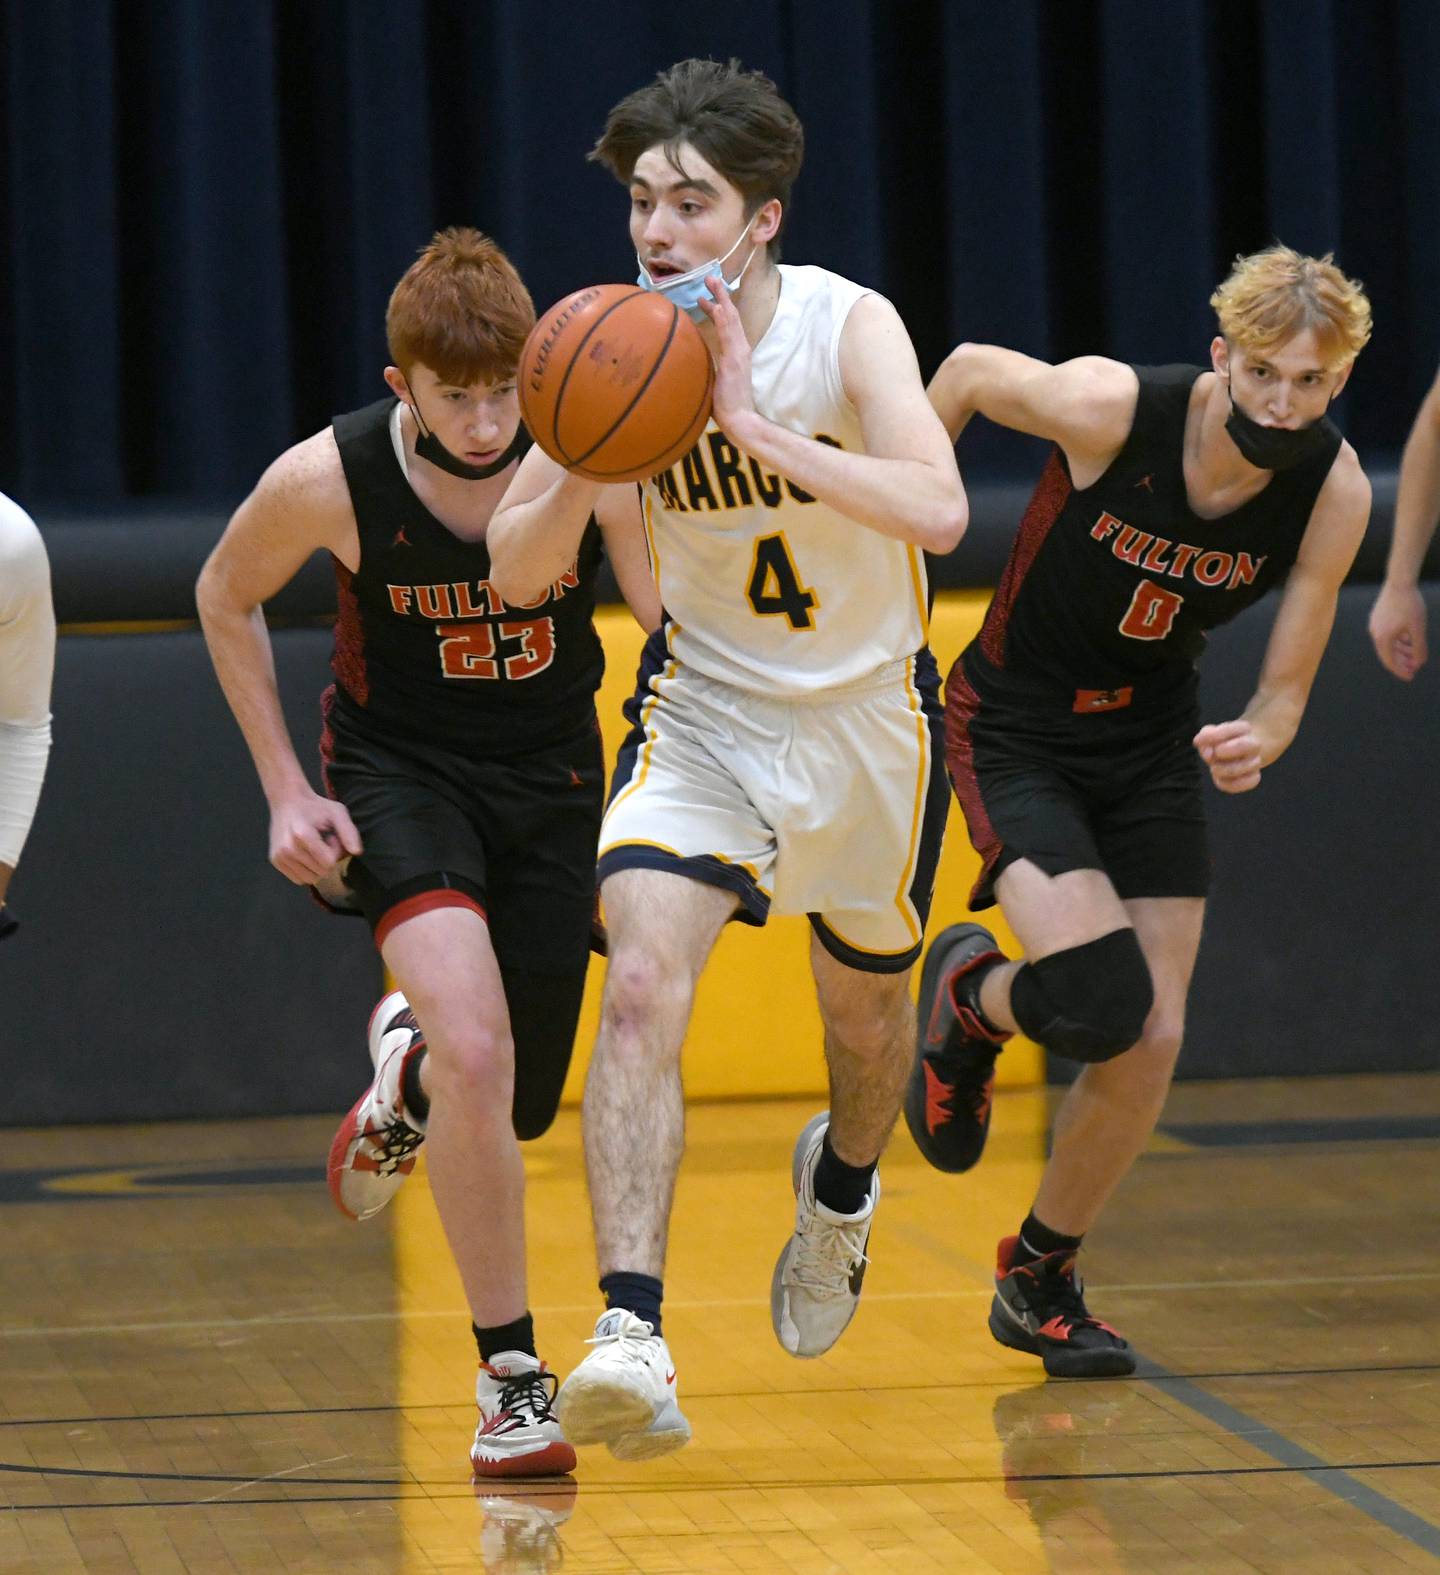 Polo's Brock Soltow gets ready to pass up court during  Jan. 14 action against Fulton.